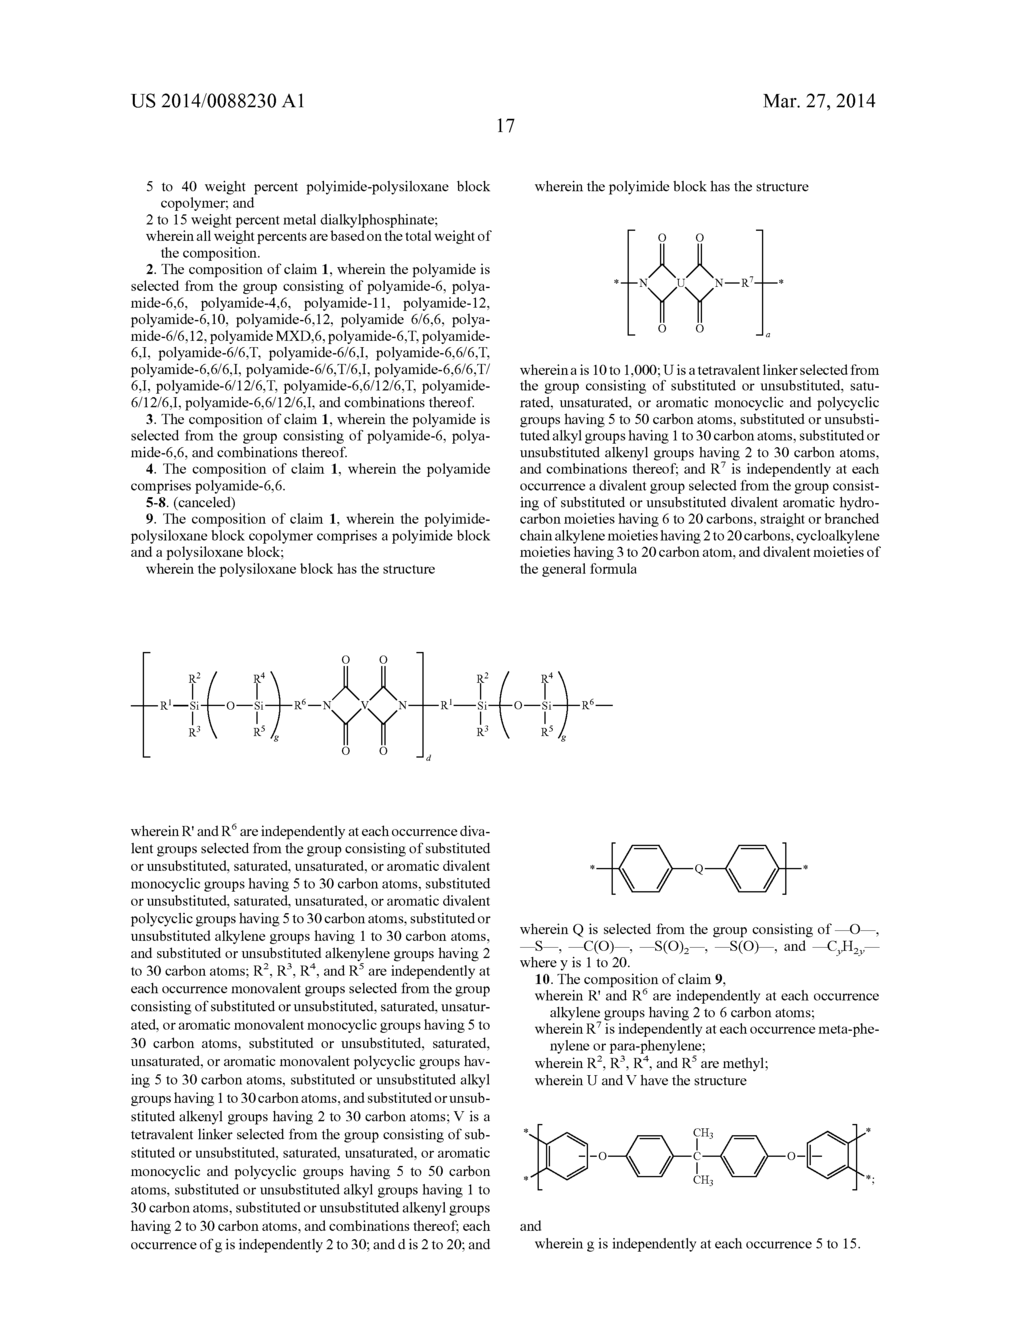 FLAME-RETARDANT POLYMER COMPOSITION AND ARTICLE - diagram, schematic, and image 18